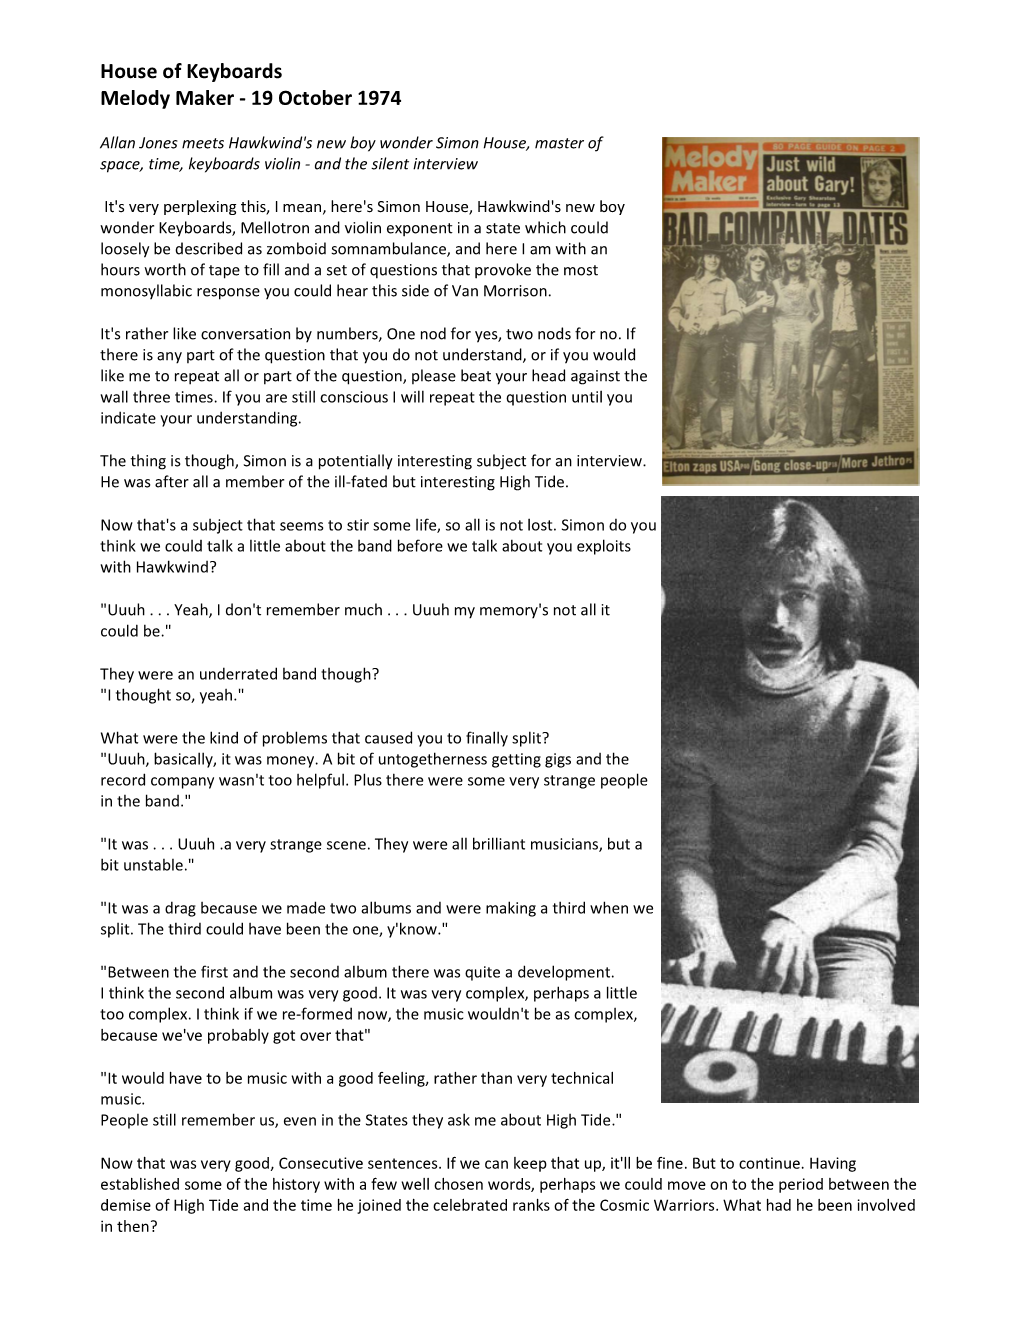 House of Keyboards Melody Maker - 19 October 1974